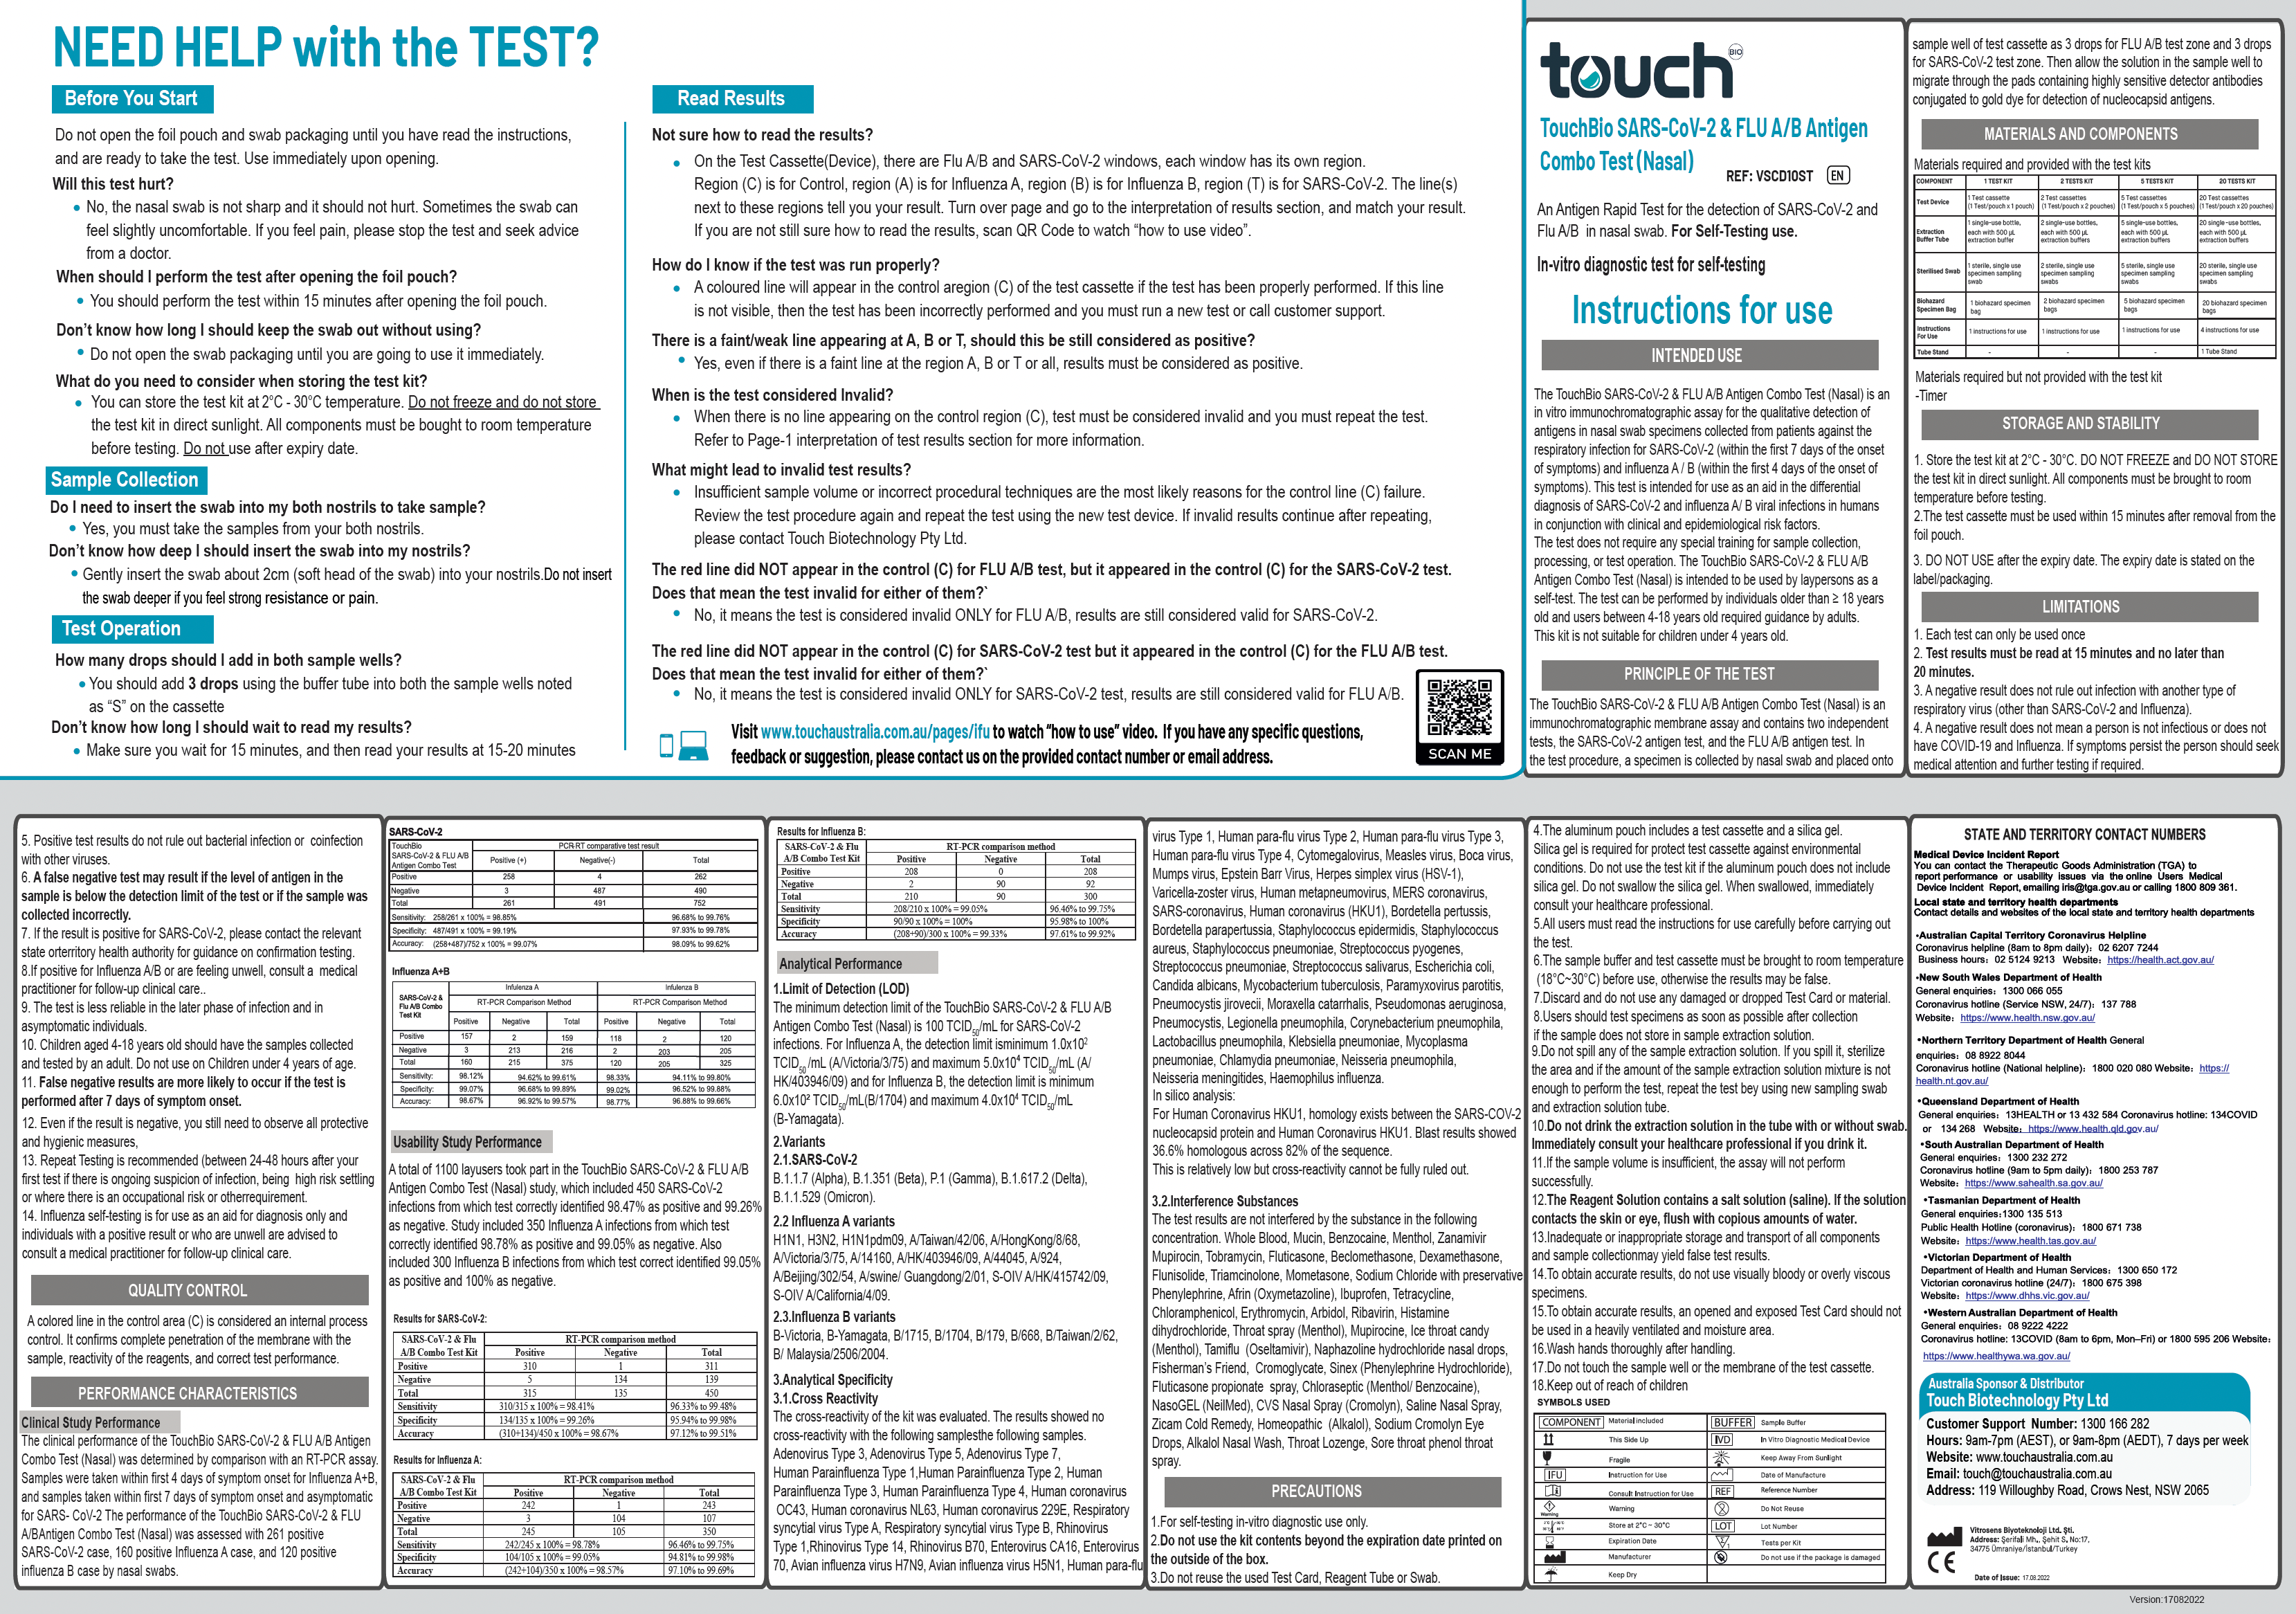 TouchBio Combo Rapid Antigen Tests Covid and Flu-  Self Testing How to use